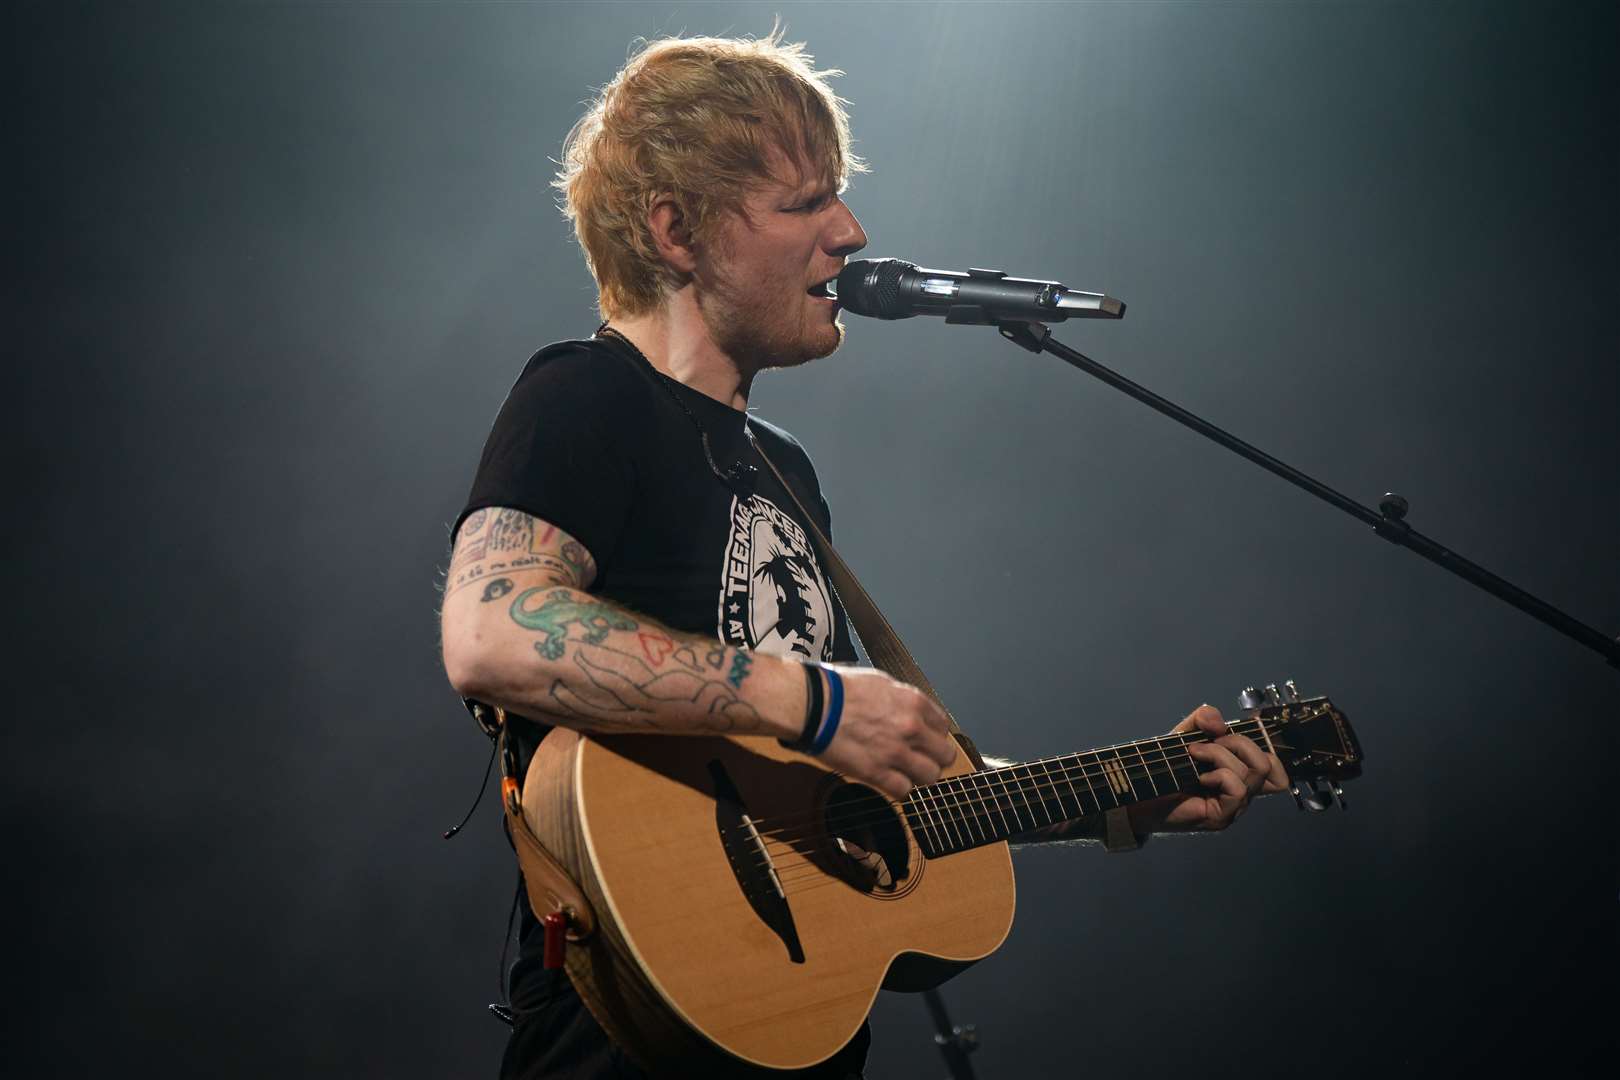 Tickets to Ed Sheeran gigs were sold at inflated prices (Aaron Chown/PA)